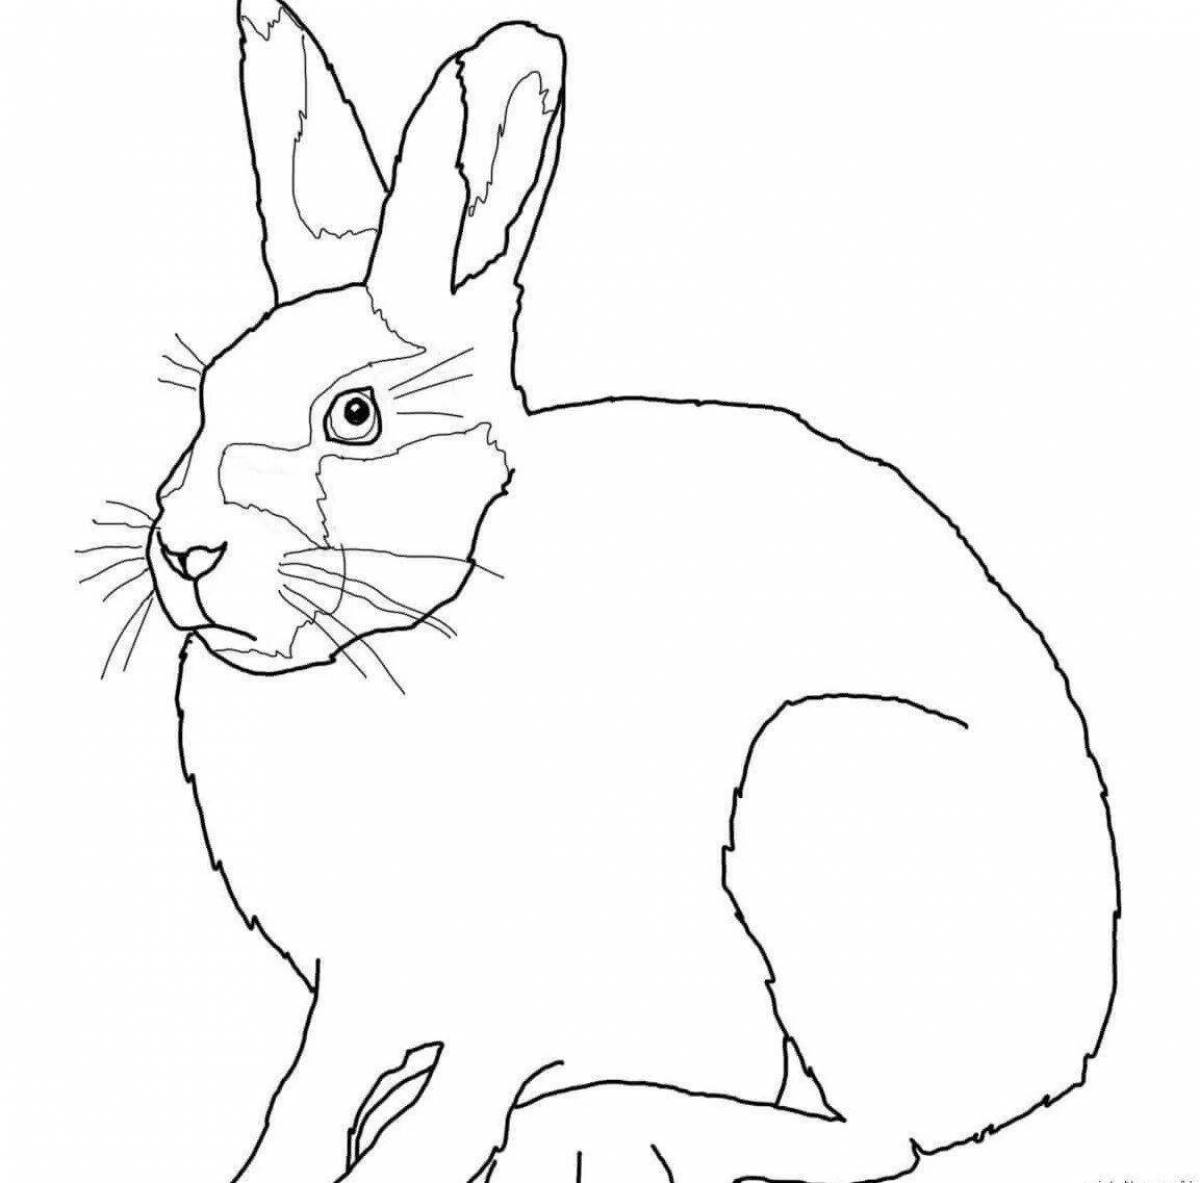 Coloring book dazzling hare for kids